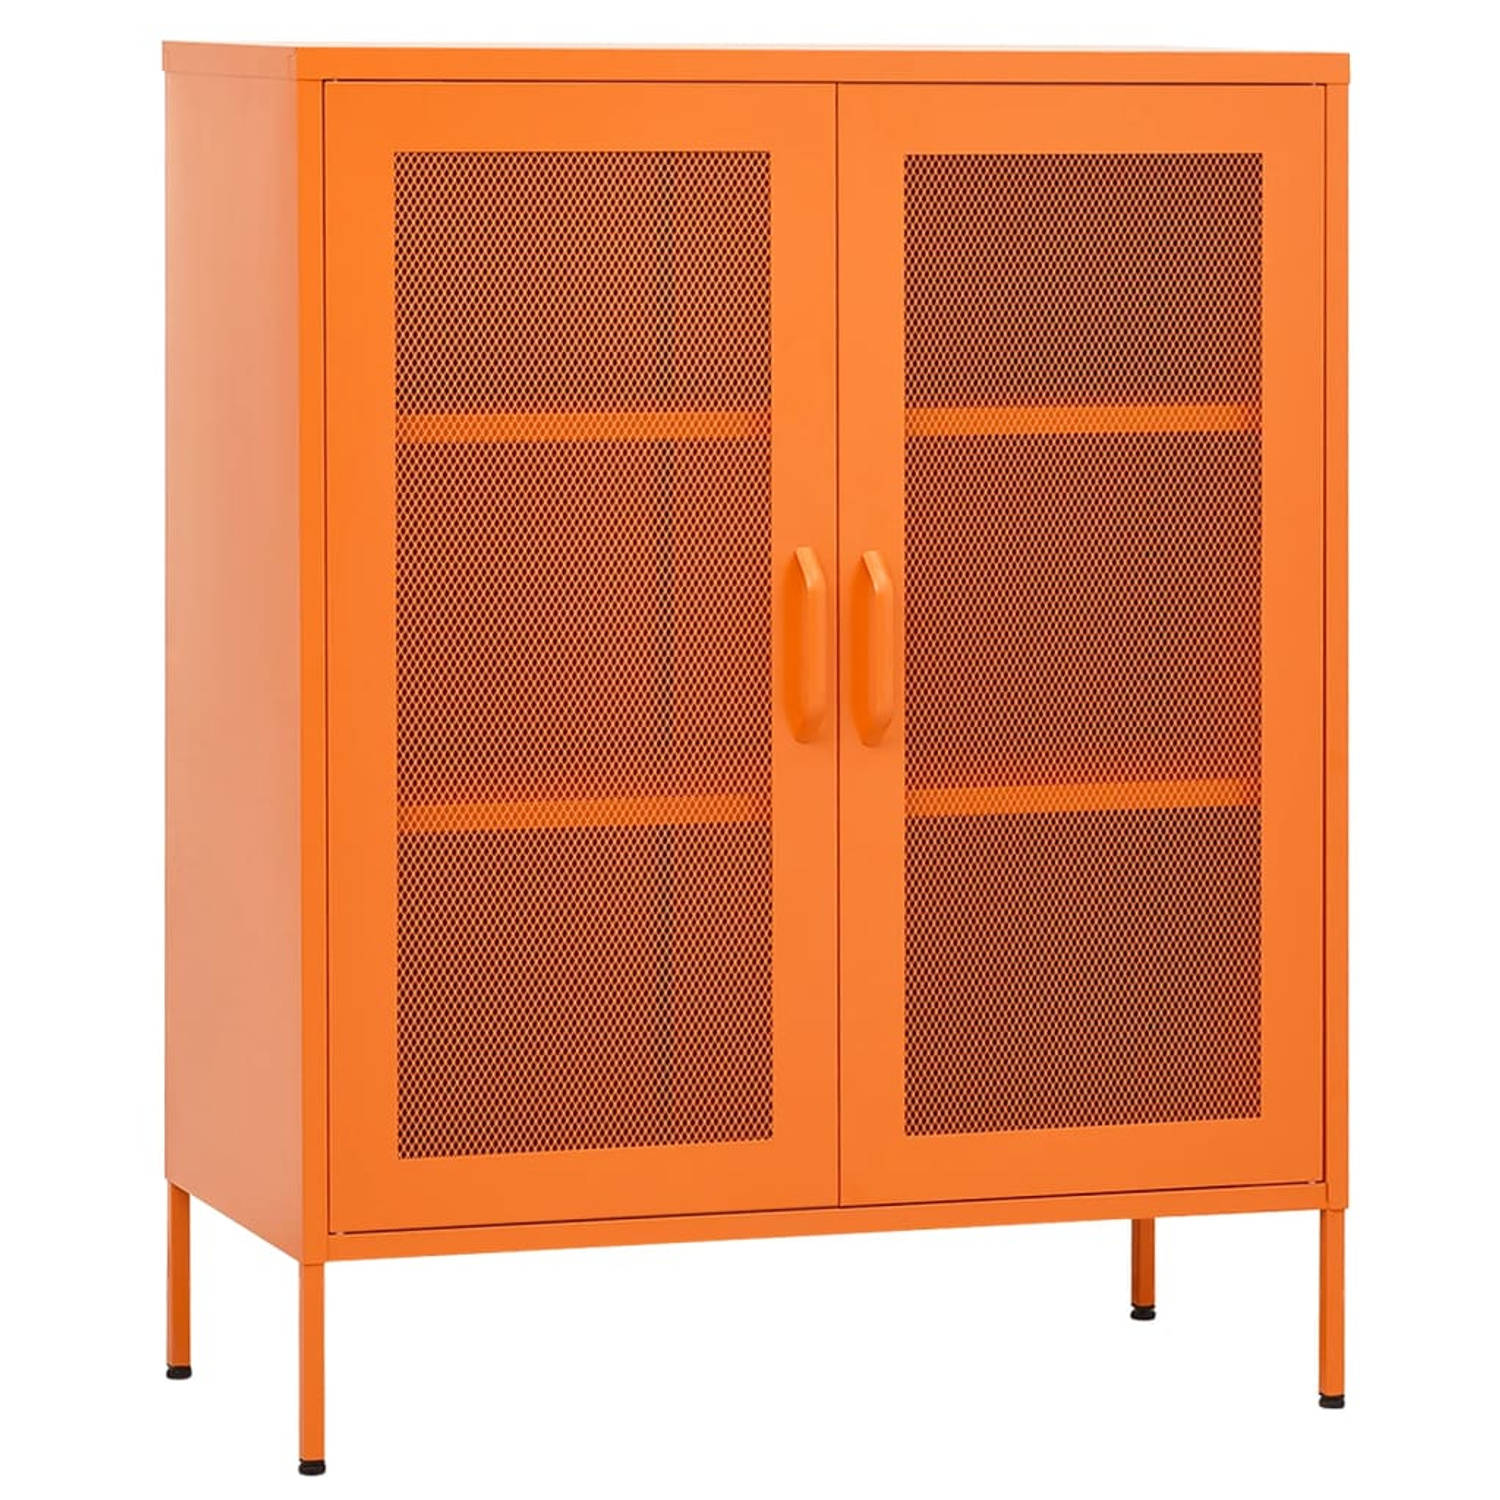 The Living Store Opbergkast Staal - 80 x 35 x 101.5 cm - Oranje